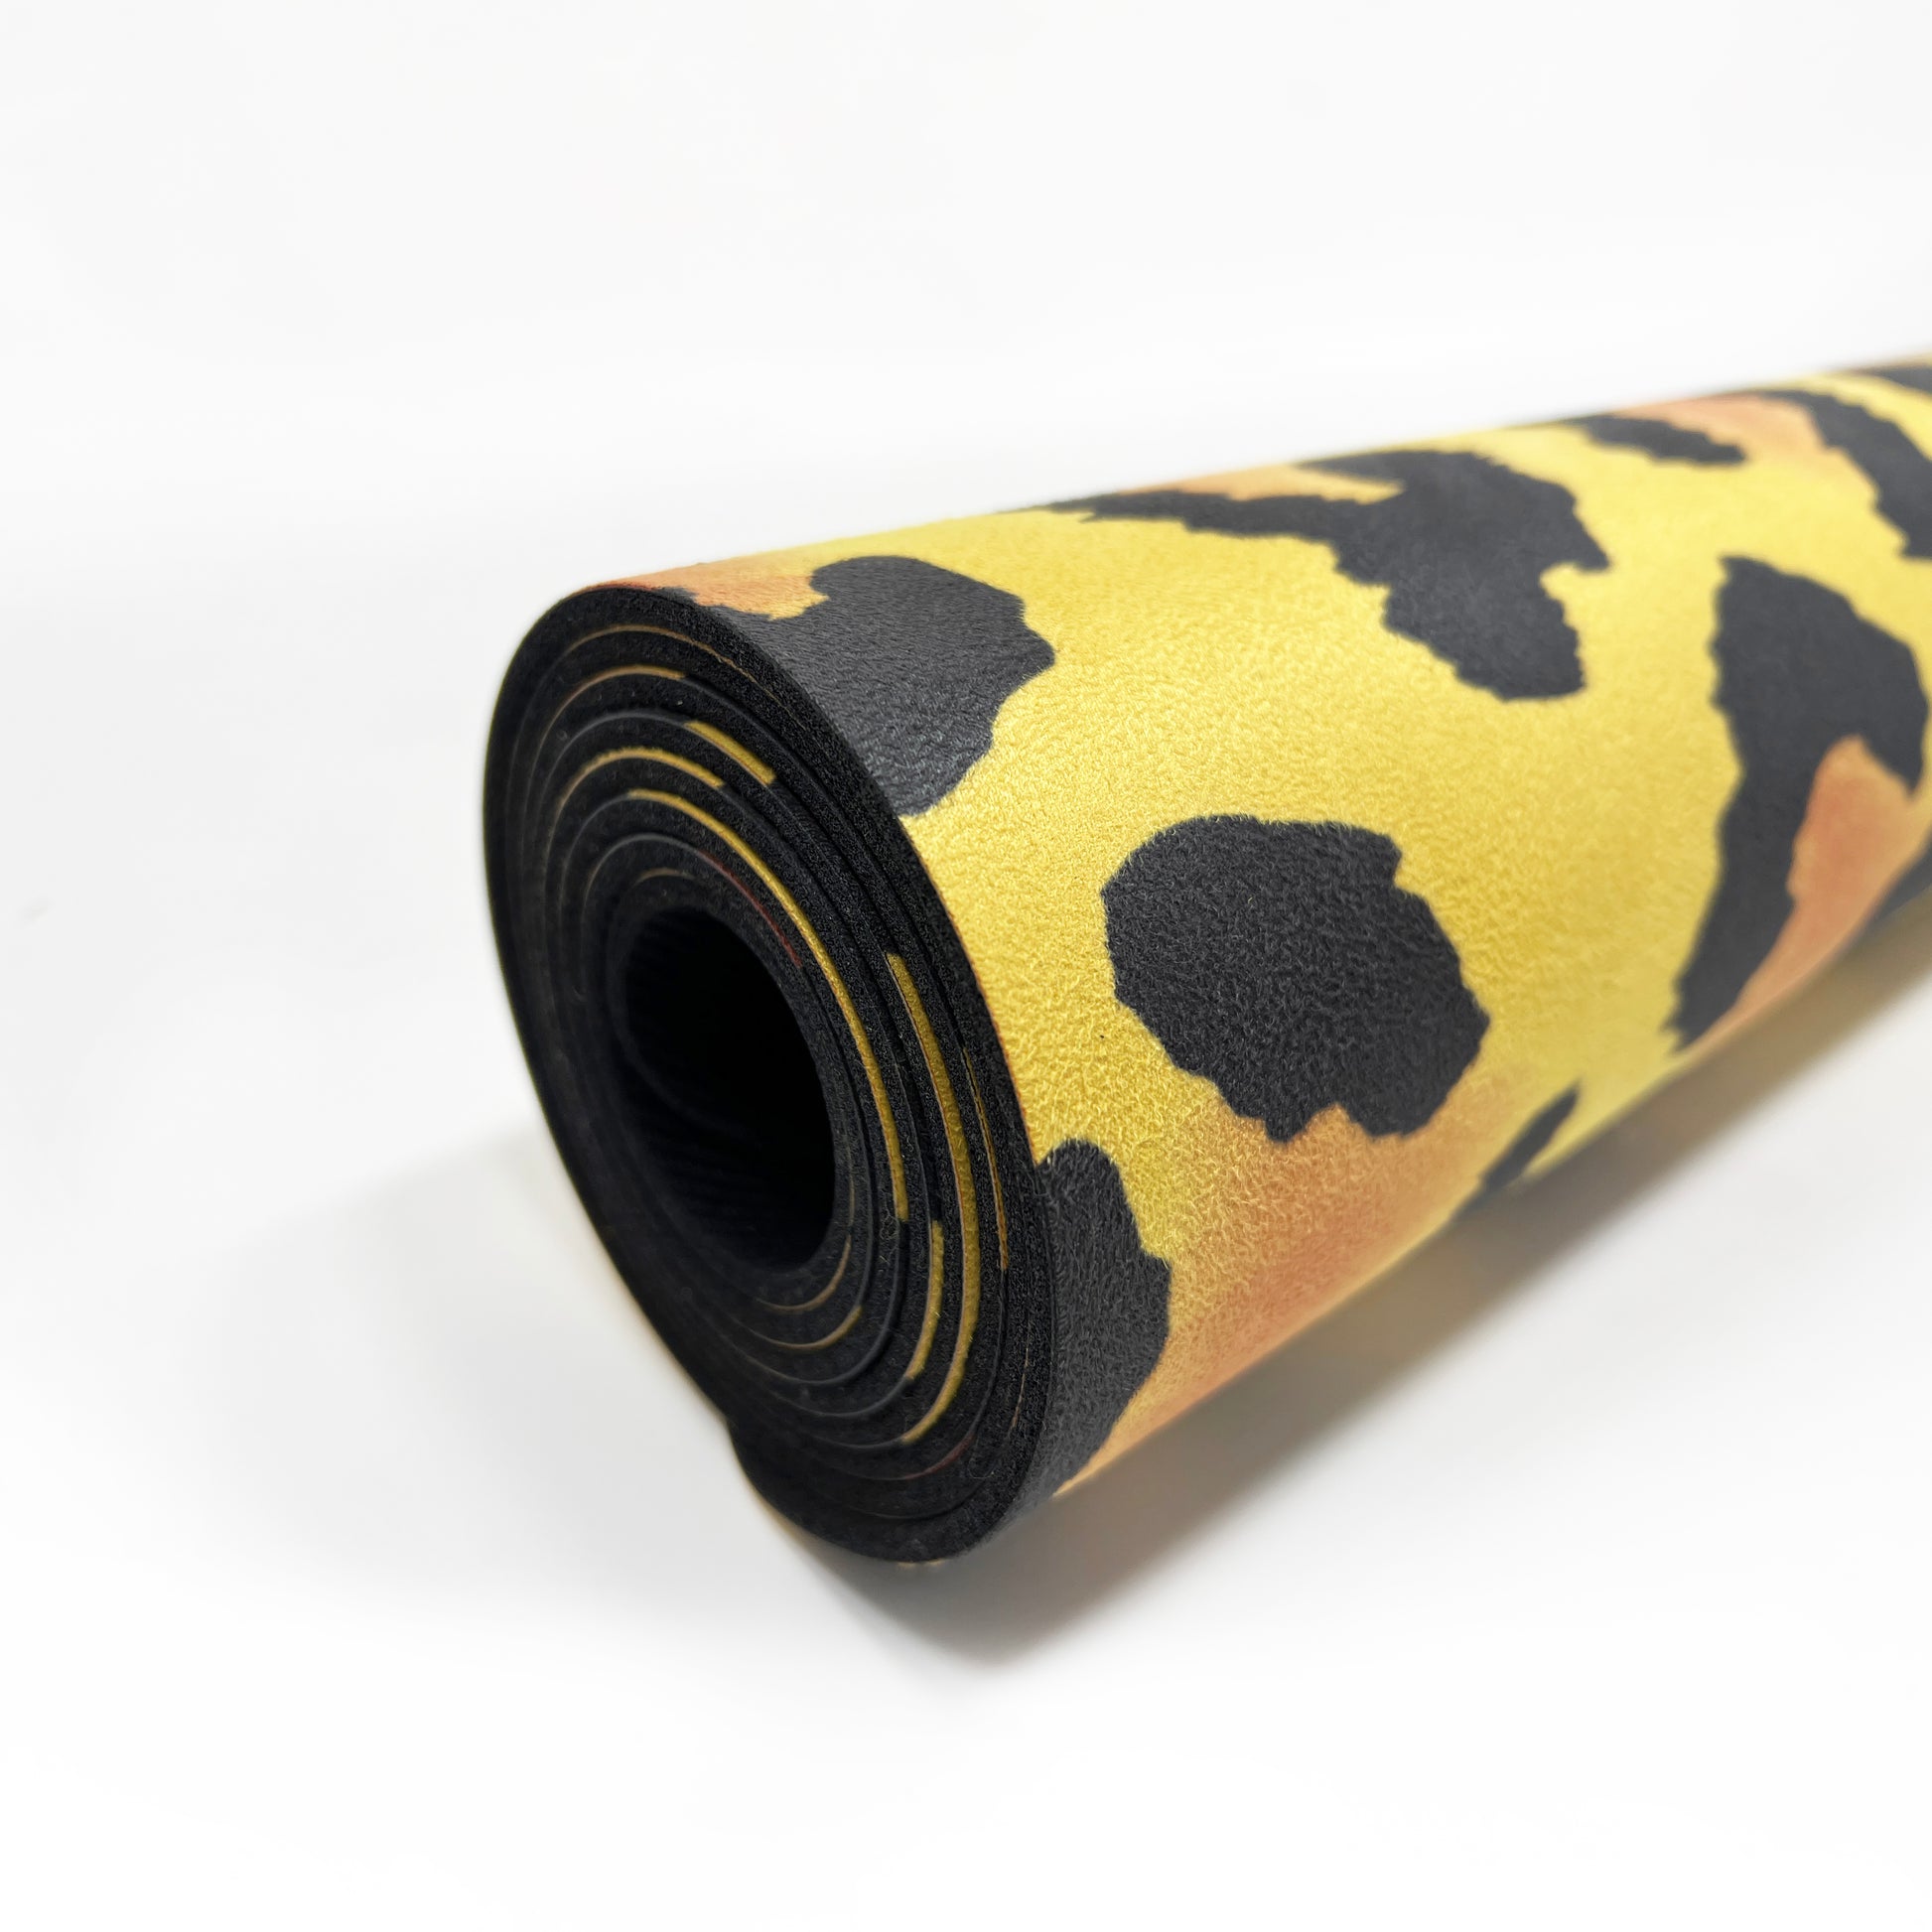 Cheetah Print Yoga Mat Thick Yoga Mat, Microfiber Suede & Natural Tree  Rubber 6mm Thick, Extremely Durable, Washable, Leopard Print 